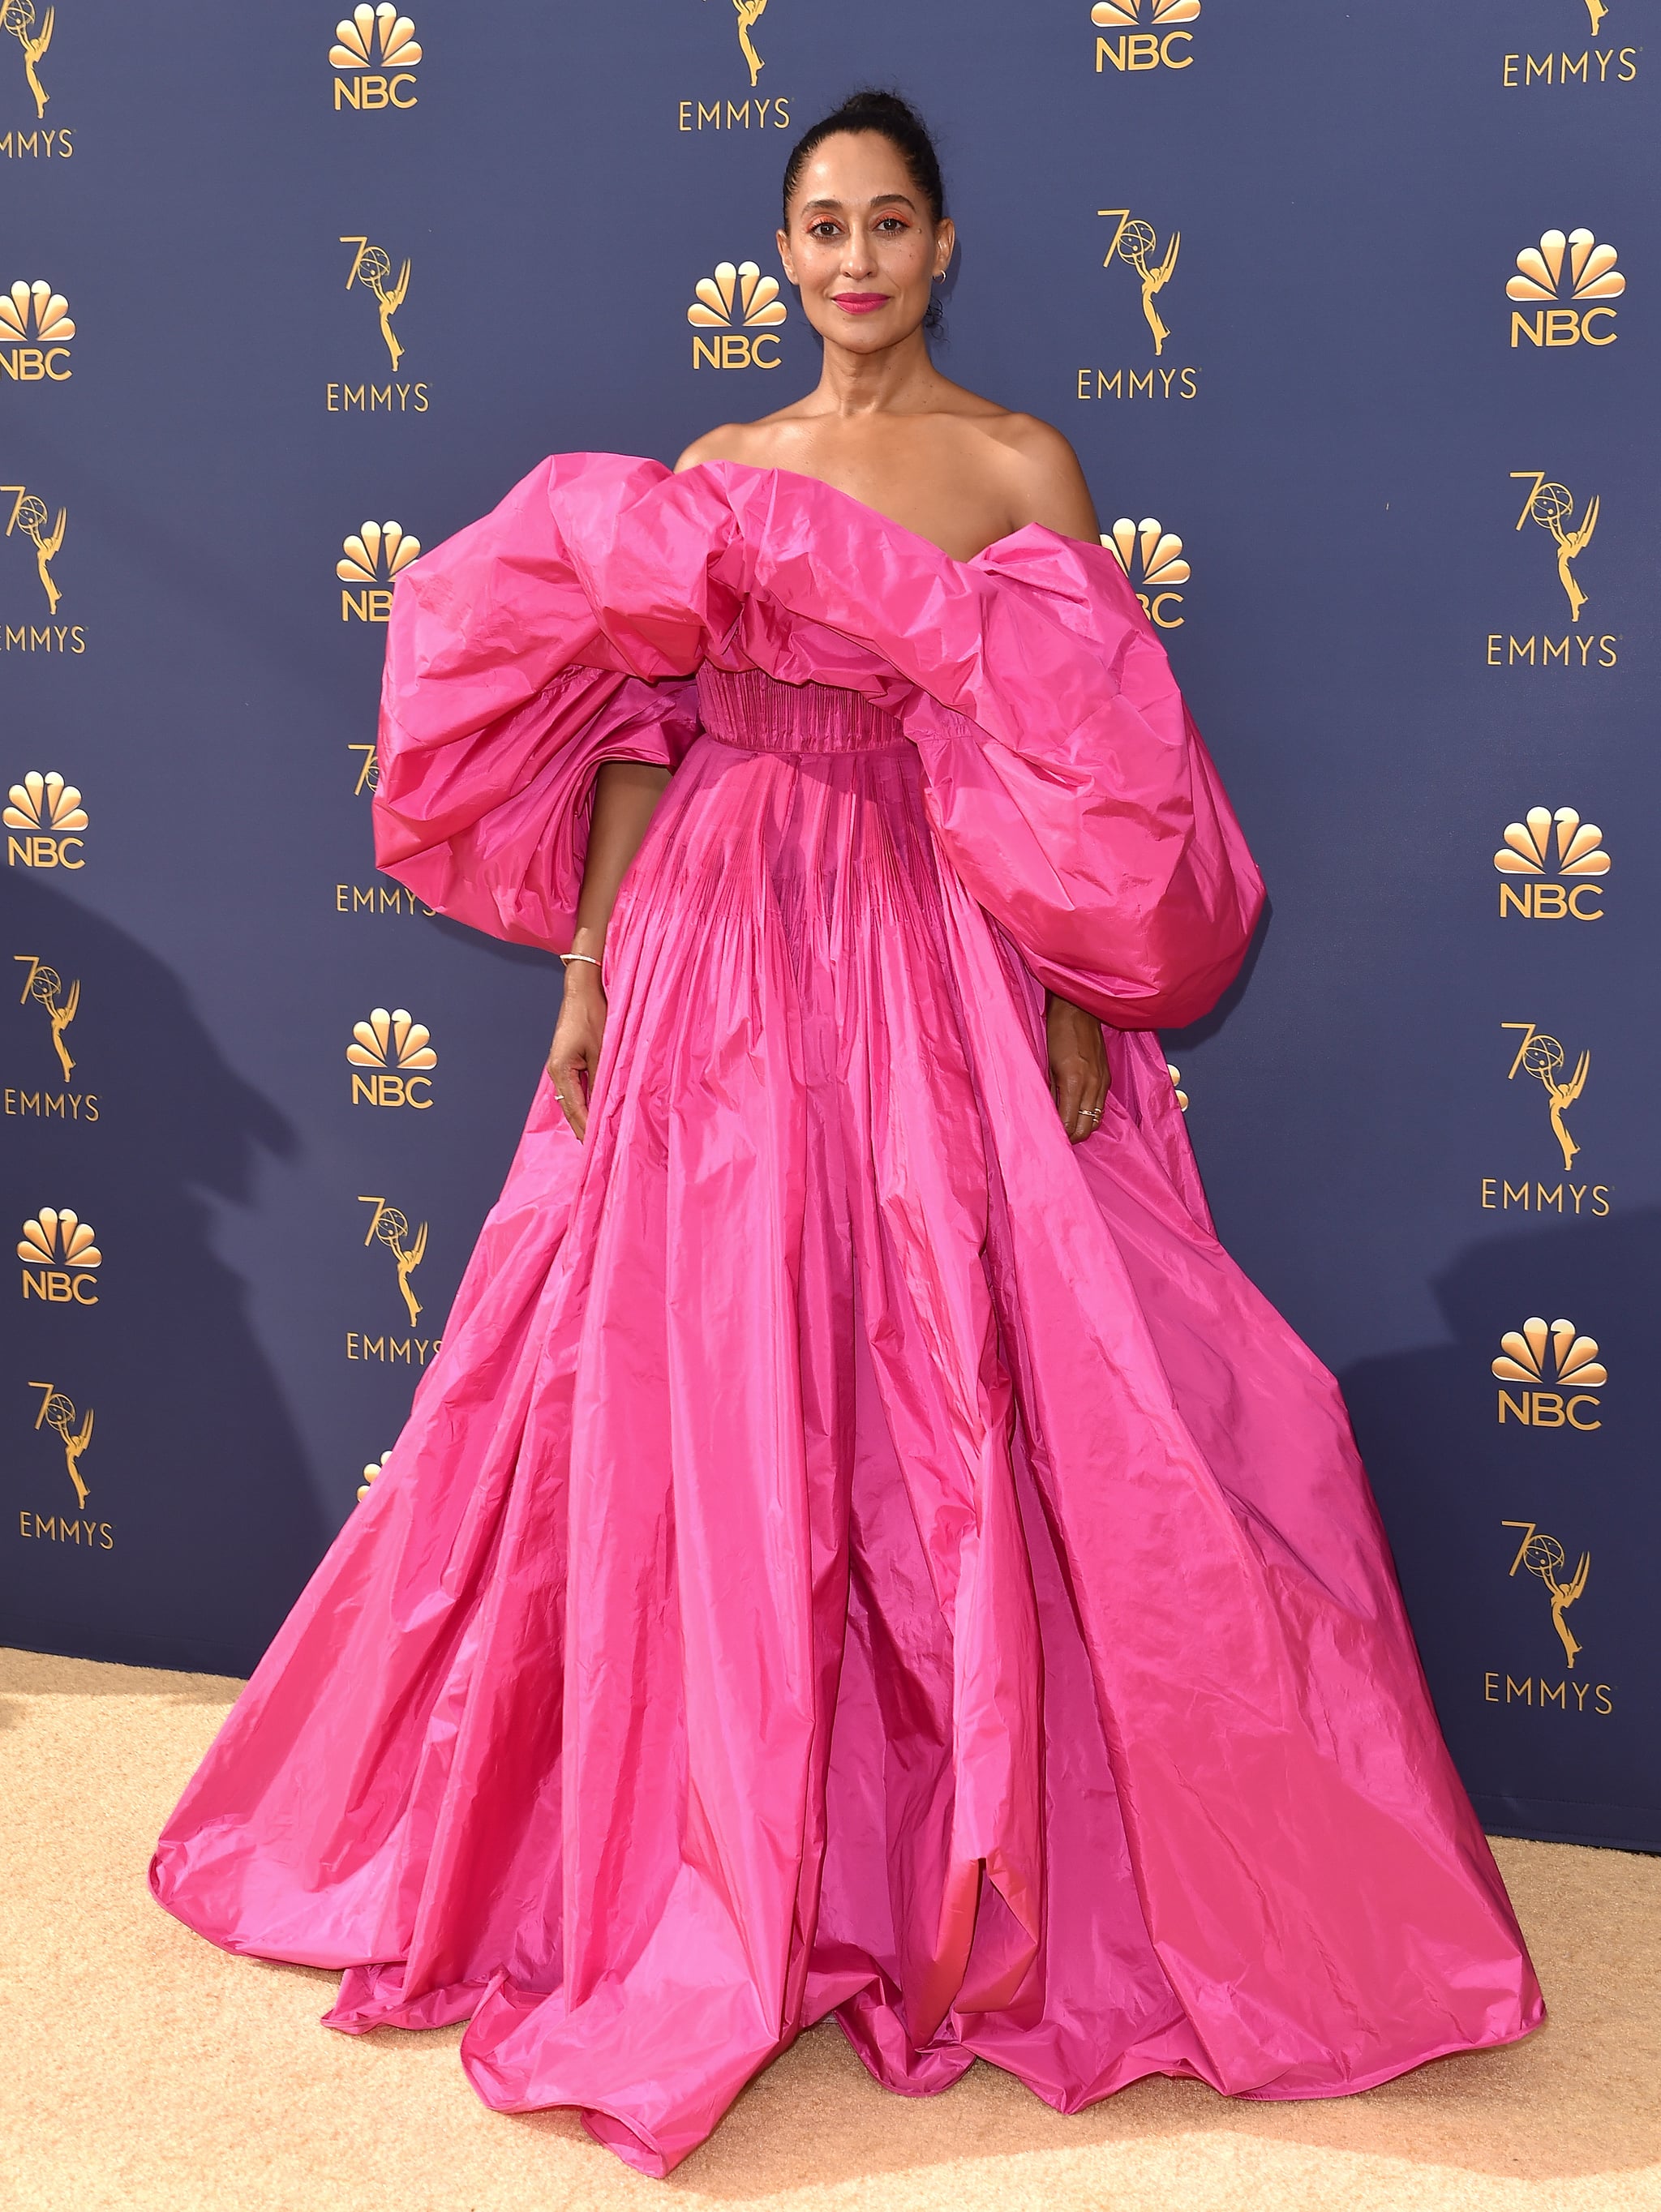 Tracee Ellis Ross Went Big With Her Pink Emmys Gown | 17 Celebrity Style Moments That Made 2018 Unforgettable | POPSUGAR Fashion Photo